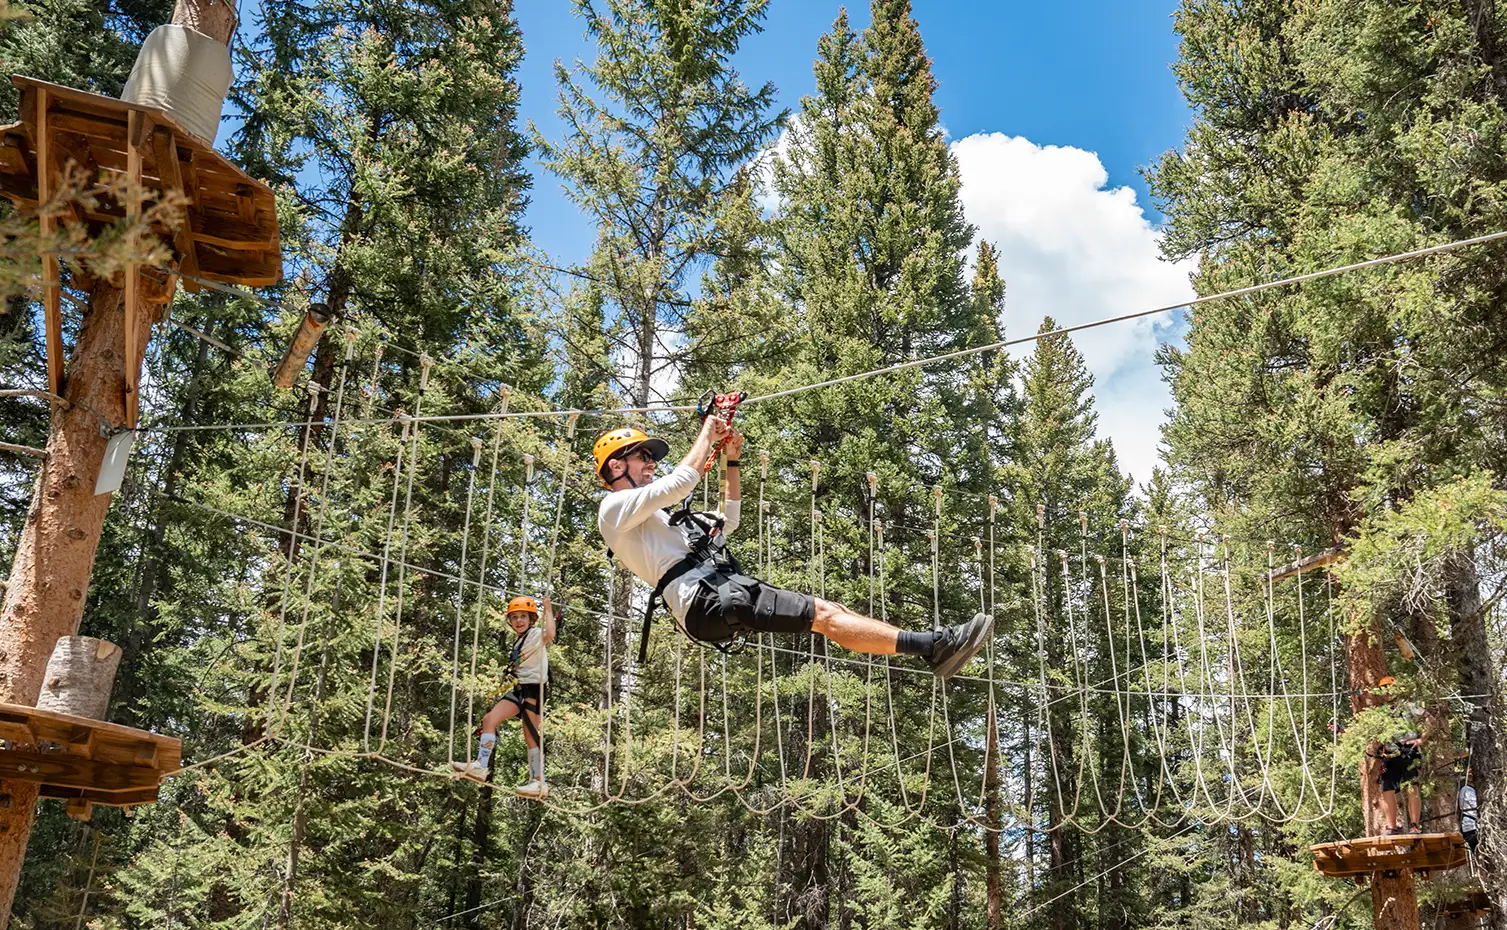 The Treeline Trial ropes course at Snowmass